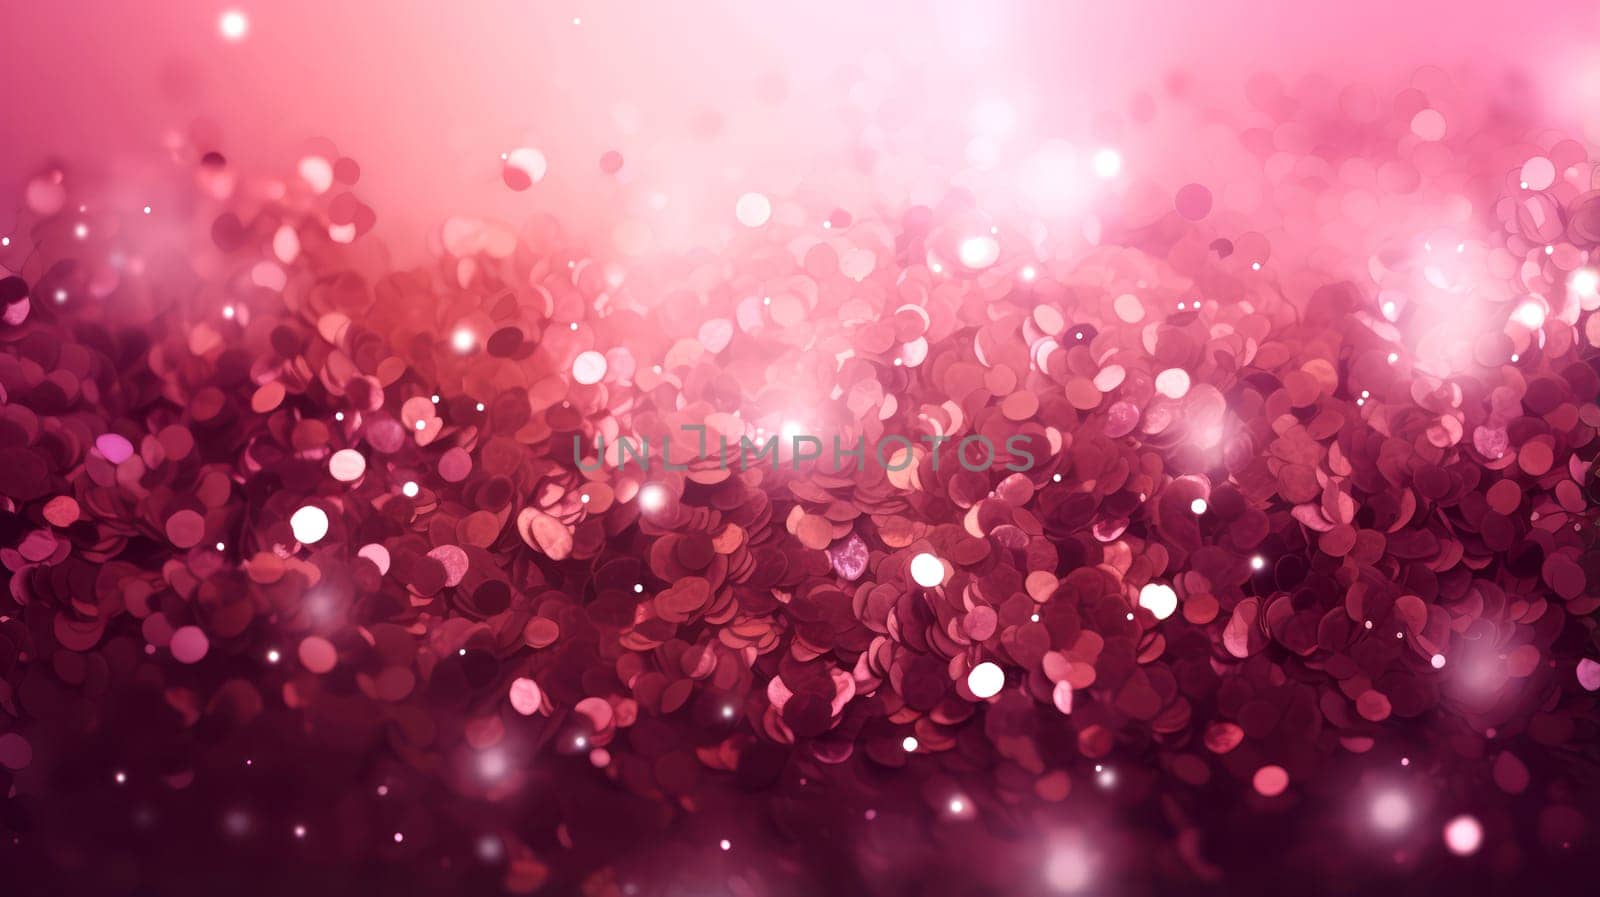 A vibrant display of sparkling pink confetti with bokeh effect